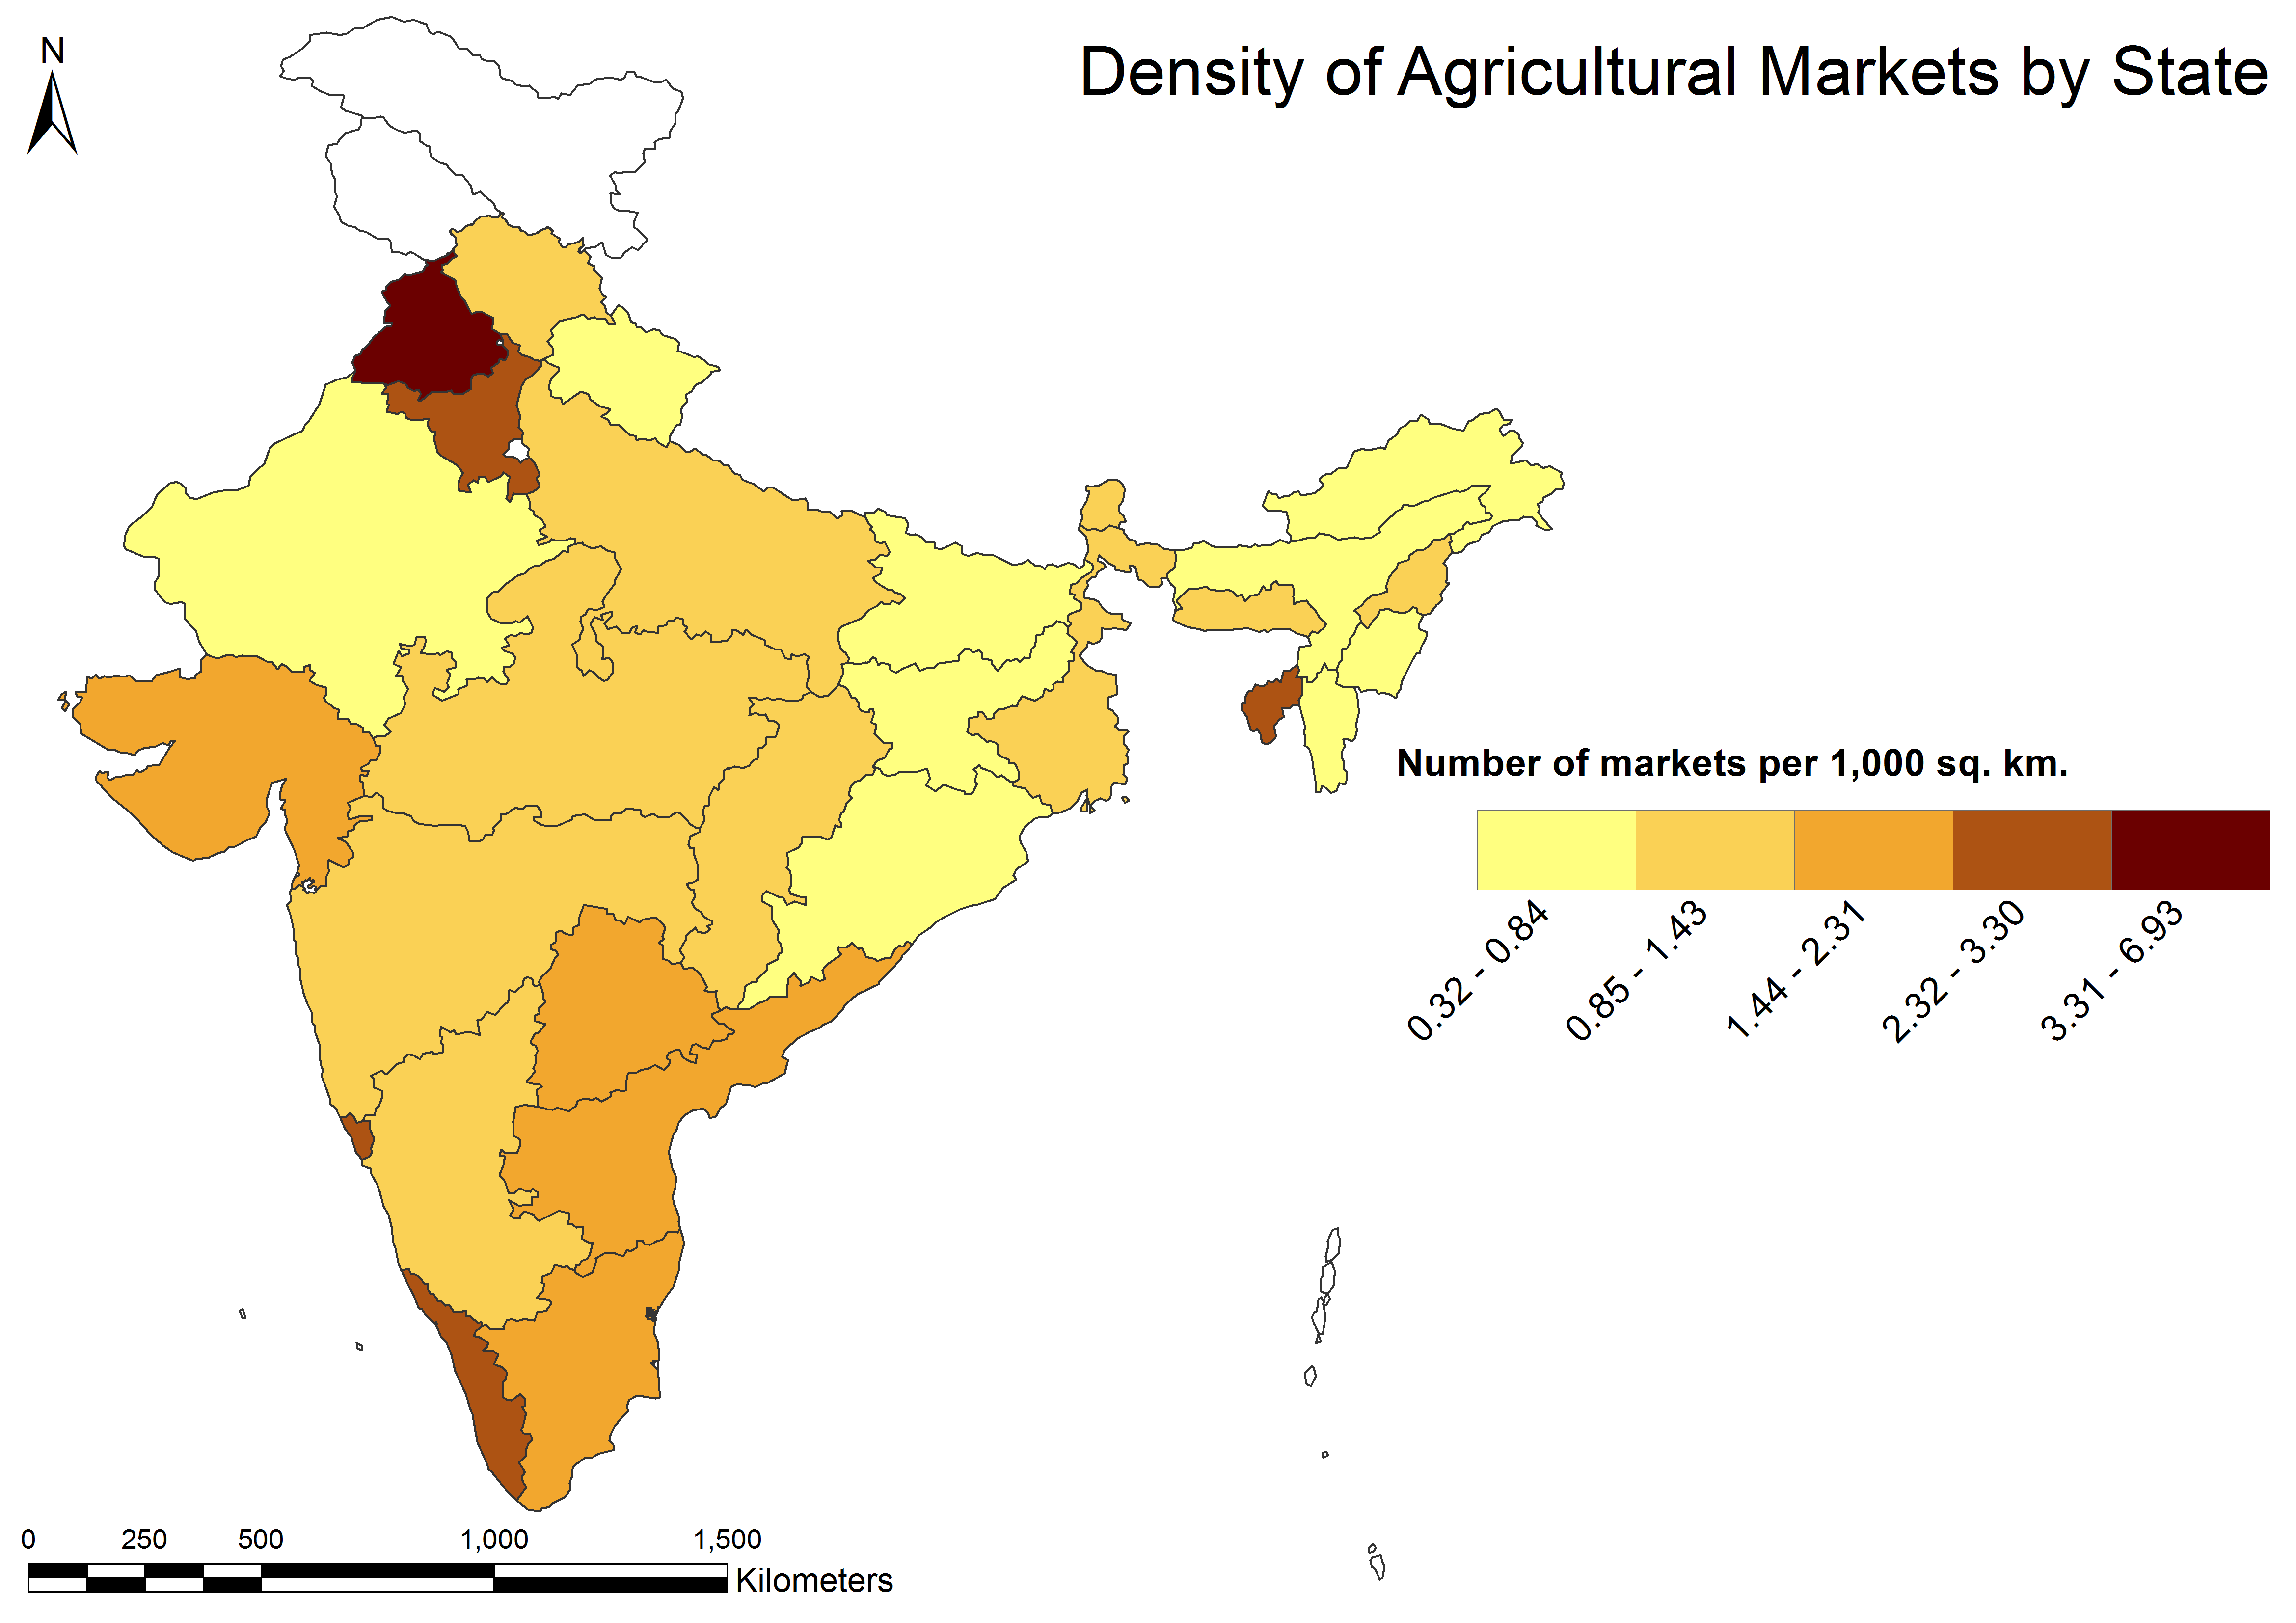 Spatial map of India showing density of agricultural markets by state, with the highest density in Punjab and Haryana and the lowest in Arunachal Pradesh, Assam, Manipur, and Mizoram